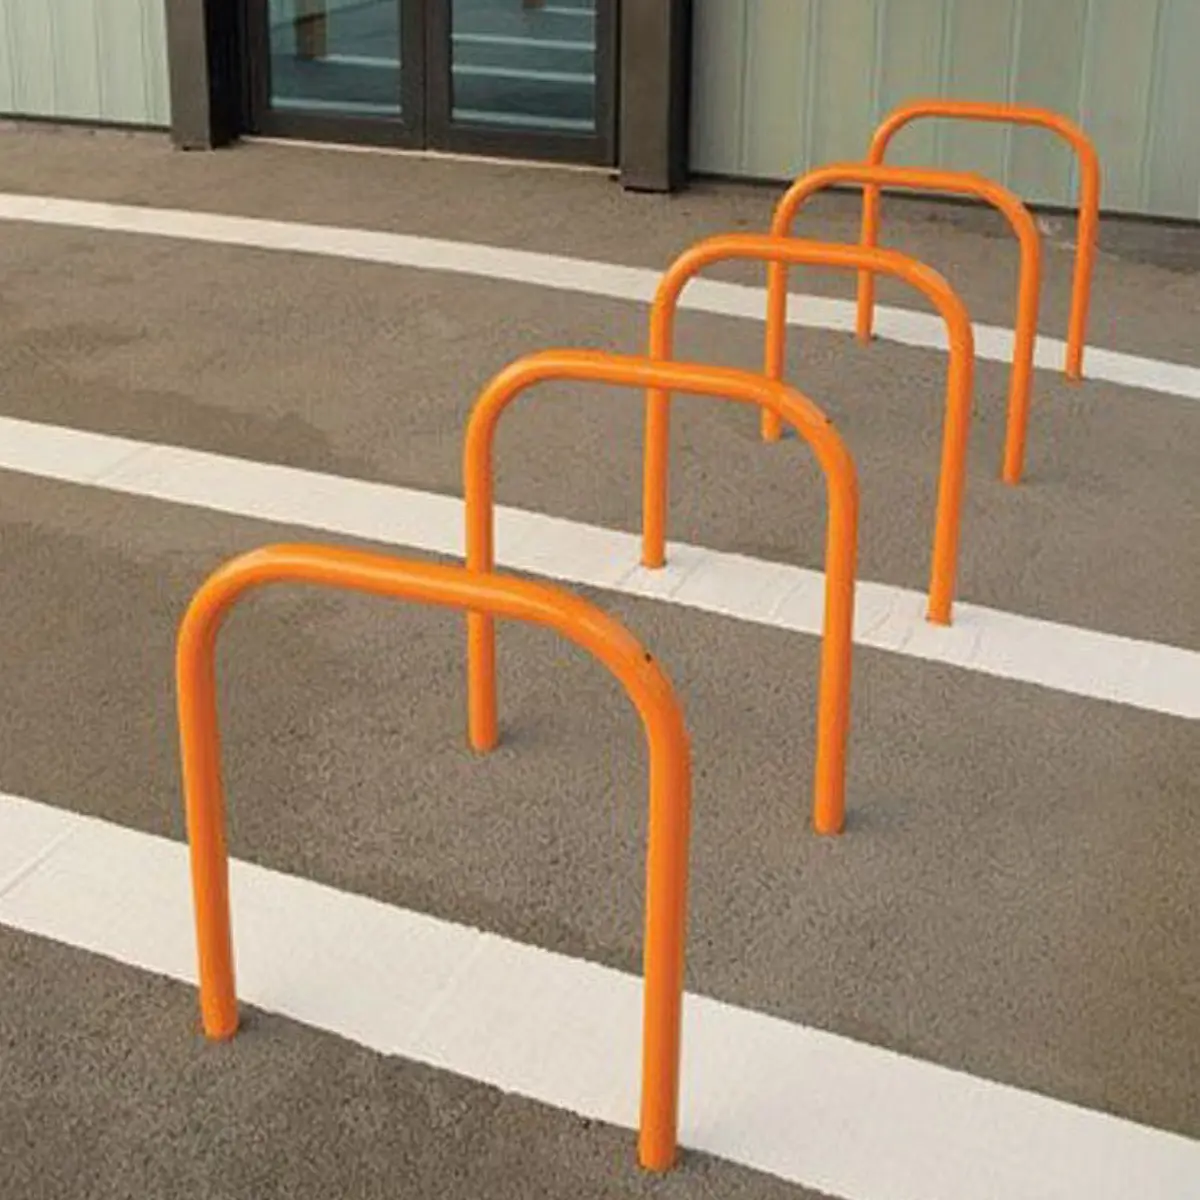 Orange Sheffield cycle stands used for bike parking.